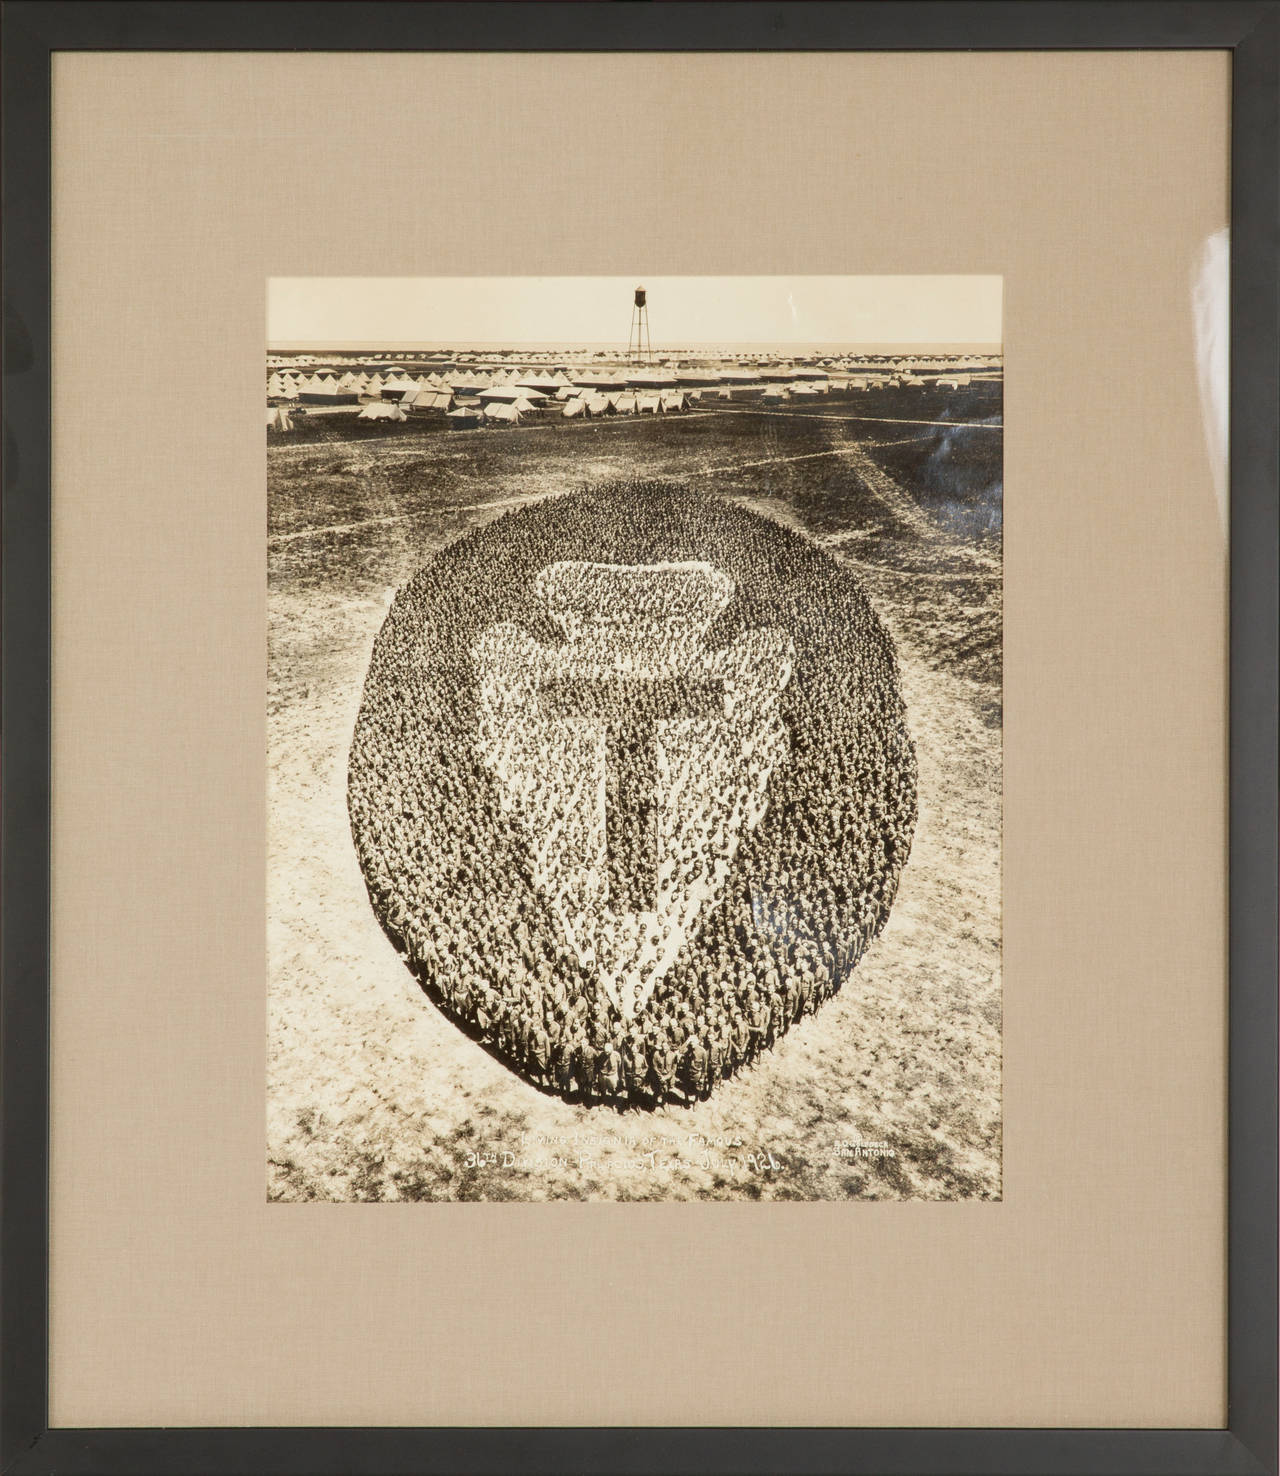 This is a wonderful example of Goldbeck's work with the military. Utilizing large amounts of soldiers in his photos, he created unusual designs. The print measuring 11" by 14", is dated July 1926 and signed Photographed by E.Q. Goldbeck of